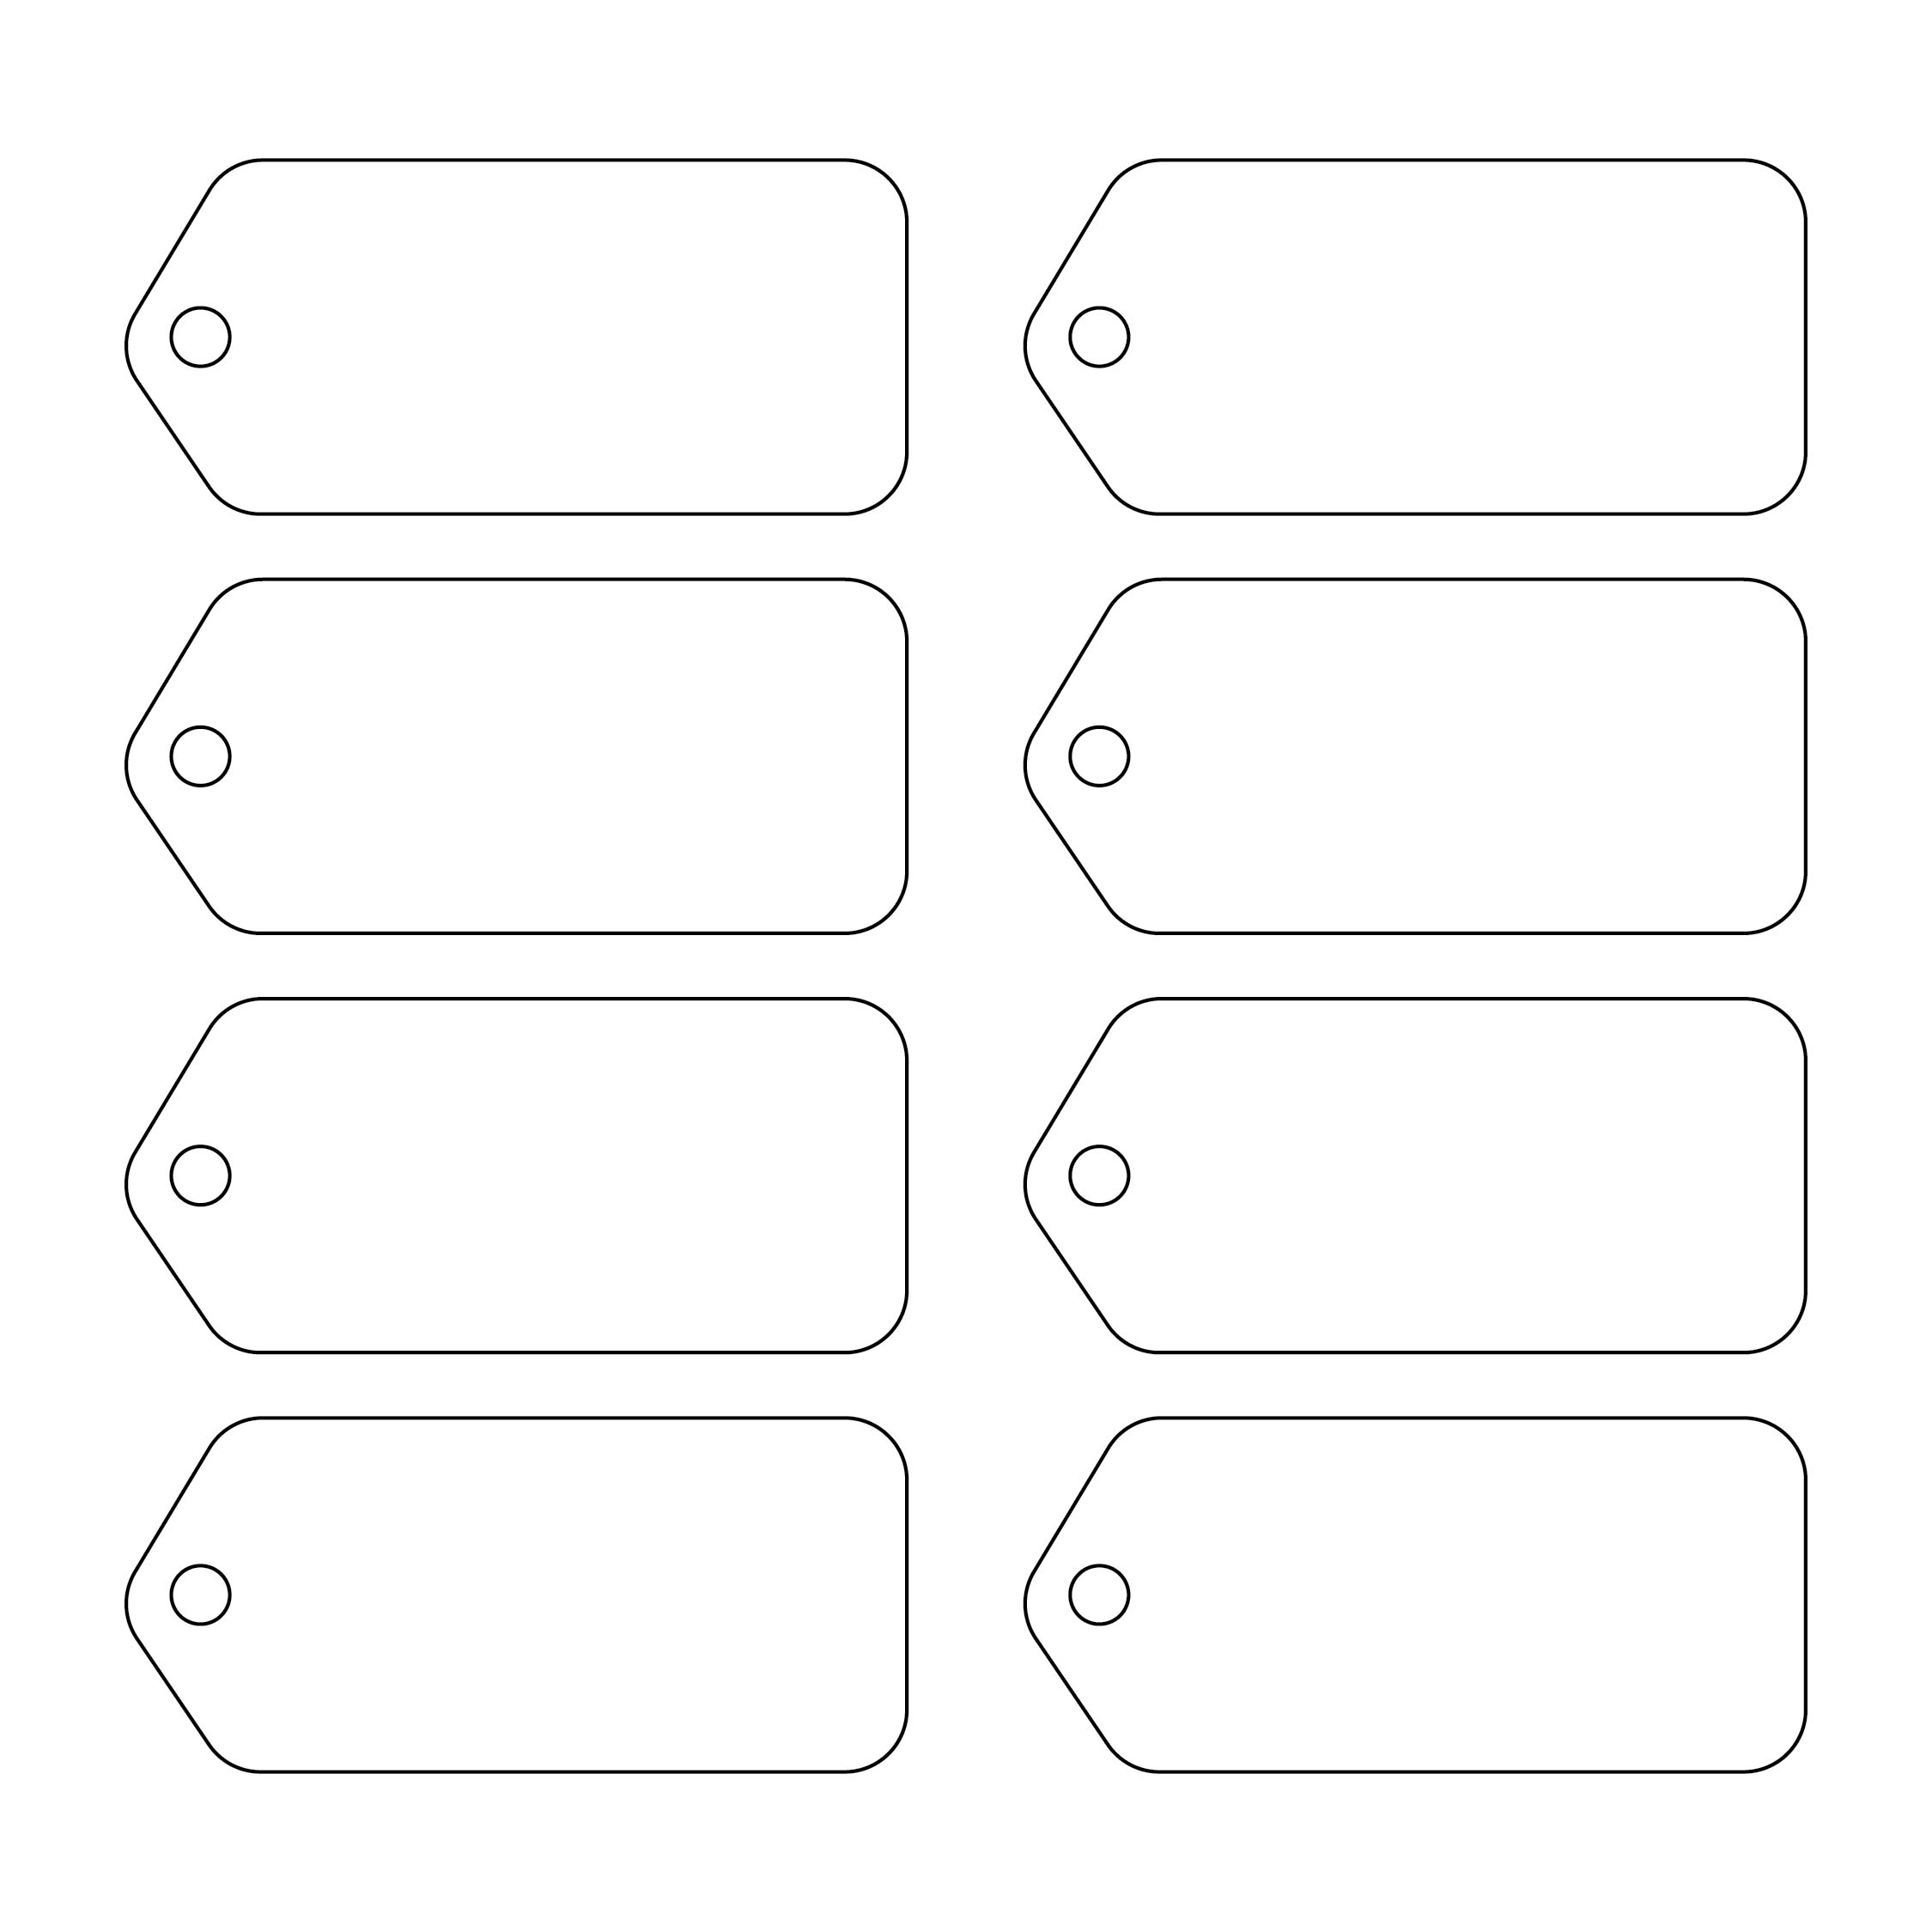 8 Best Images of Free Printable Template For Gift Tags Free Printable